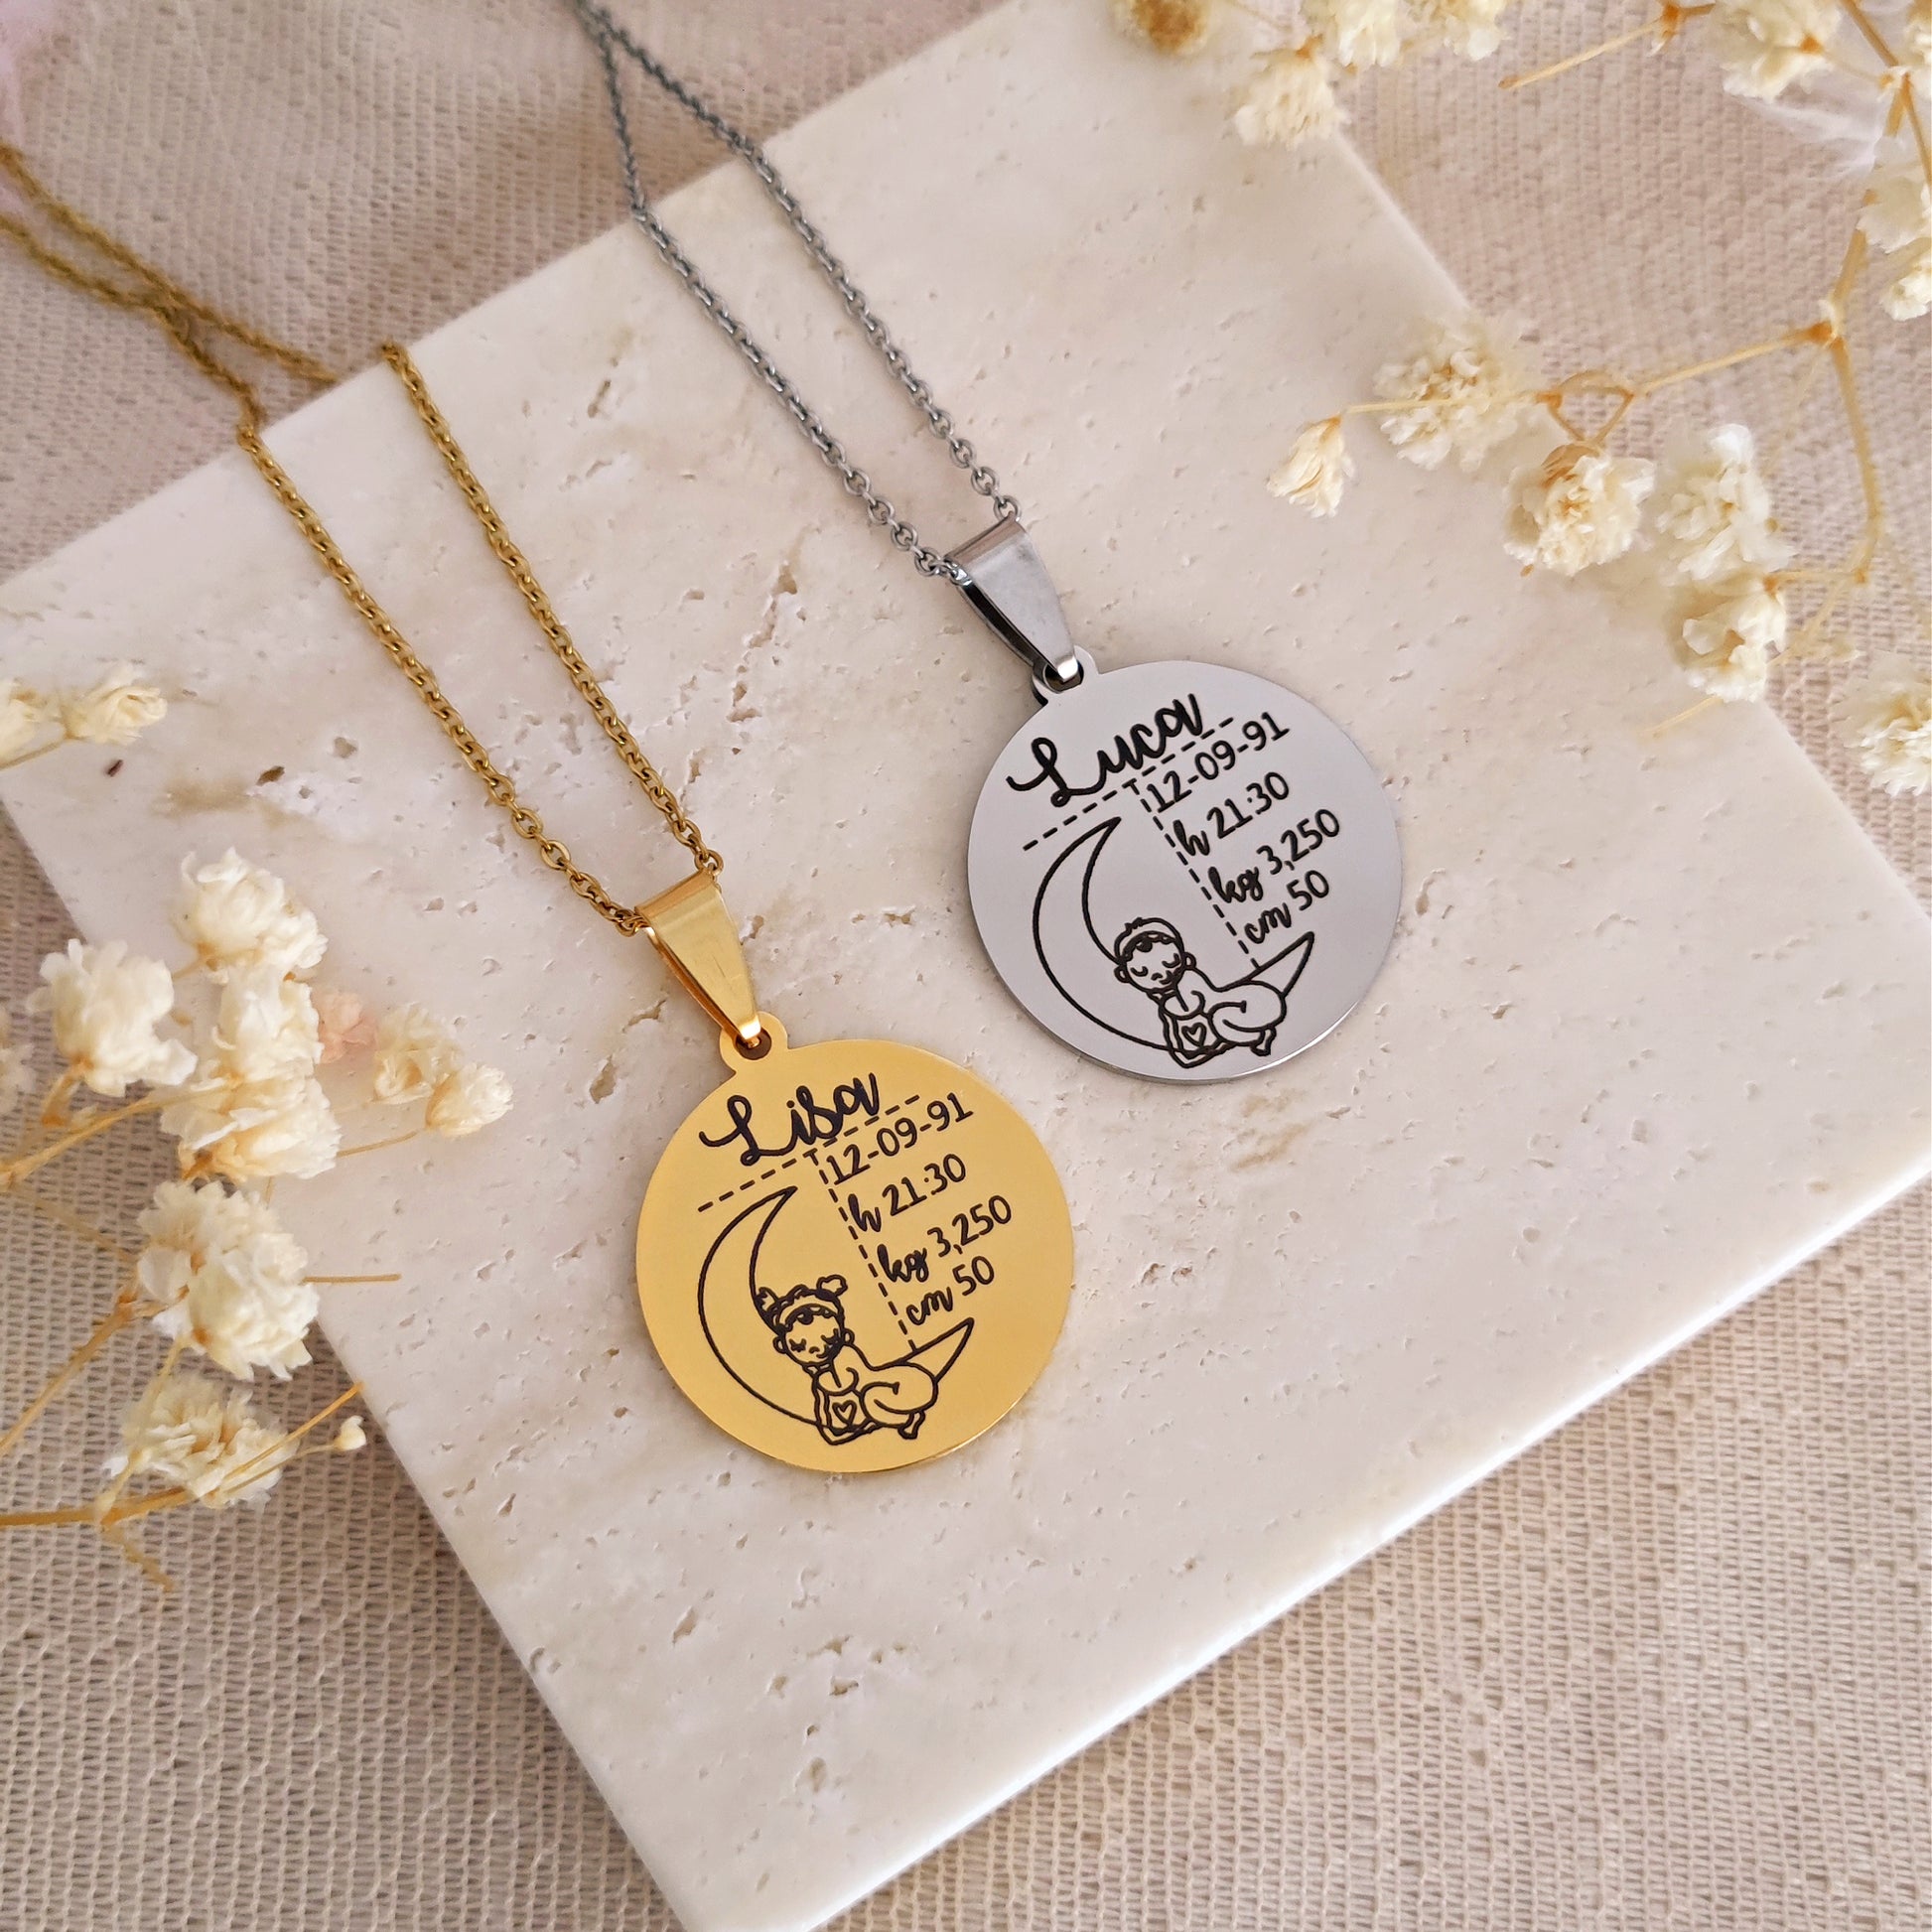 Gift To Daughter On Becoming A Mom - Forever Love Necklace, Personalized  Gift, Gift For Her, Gifts For Mom, New Mom Gift, Mom Gifts, Baby Shower Gift,  Mom To Be, Gift Ideas 